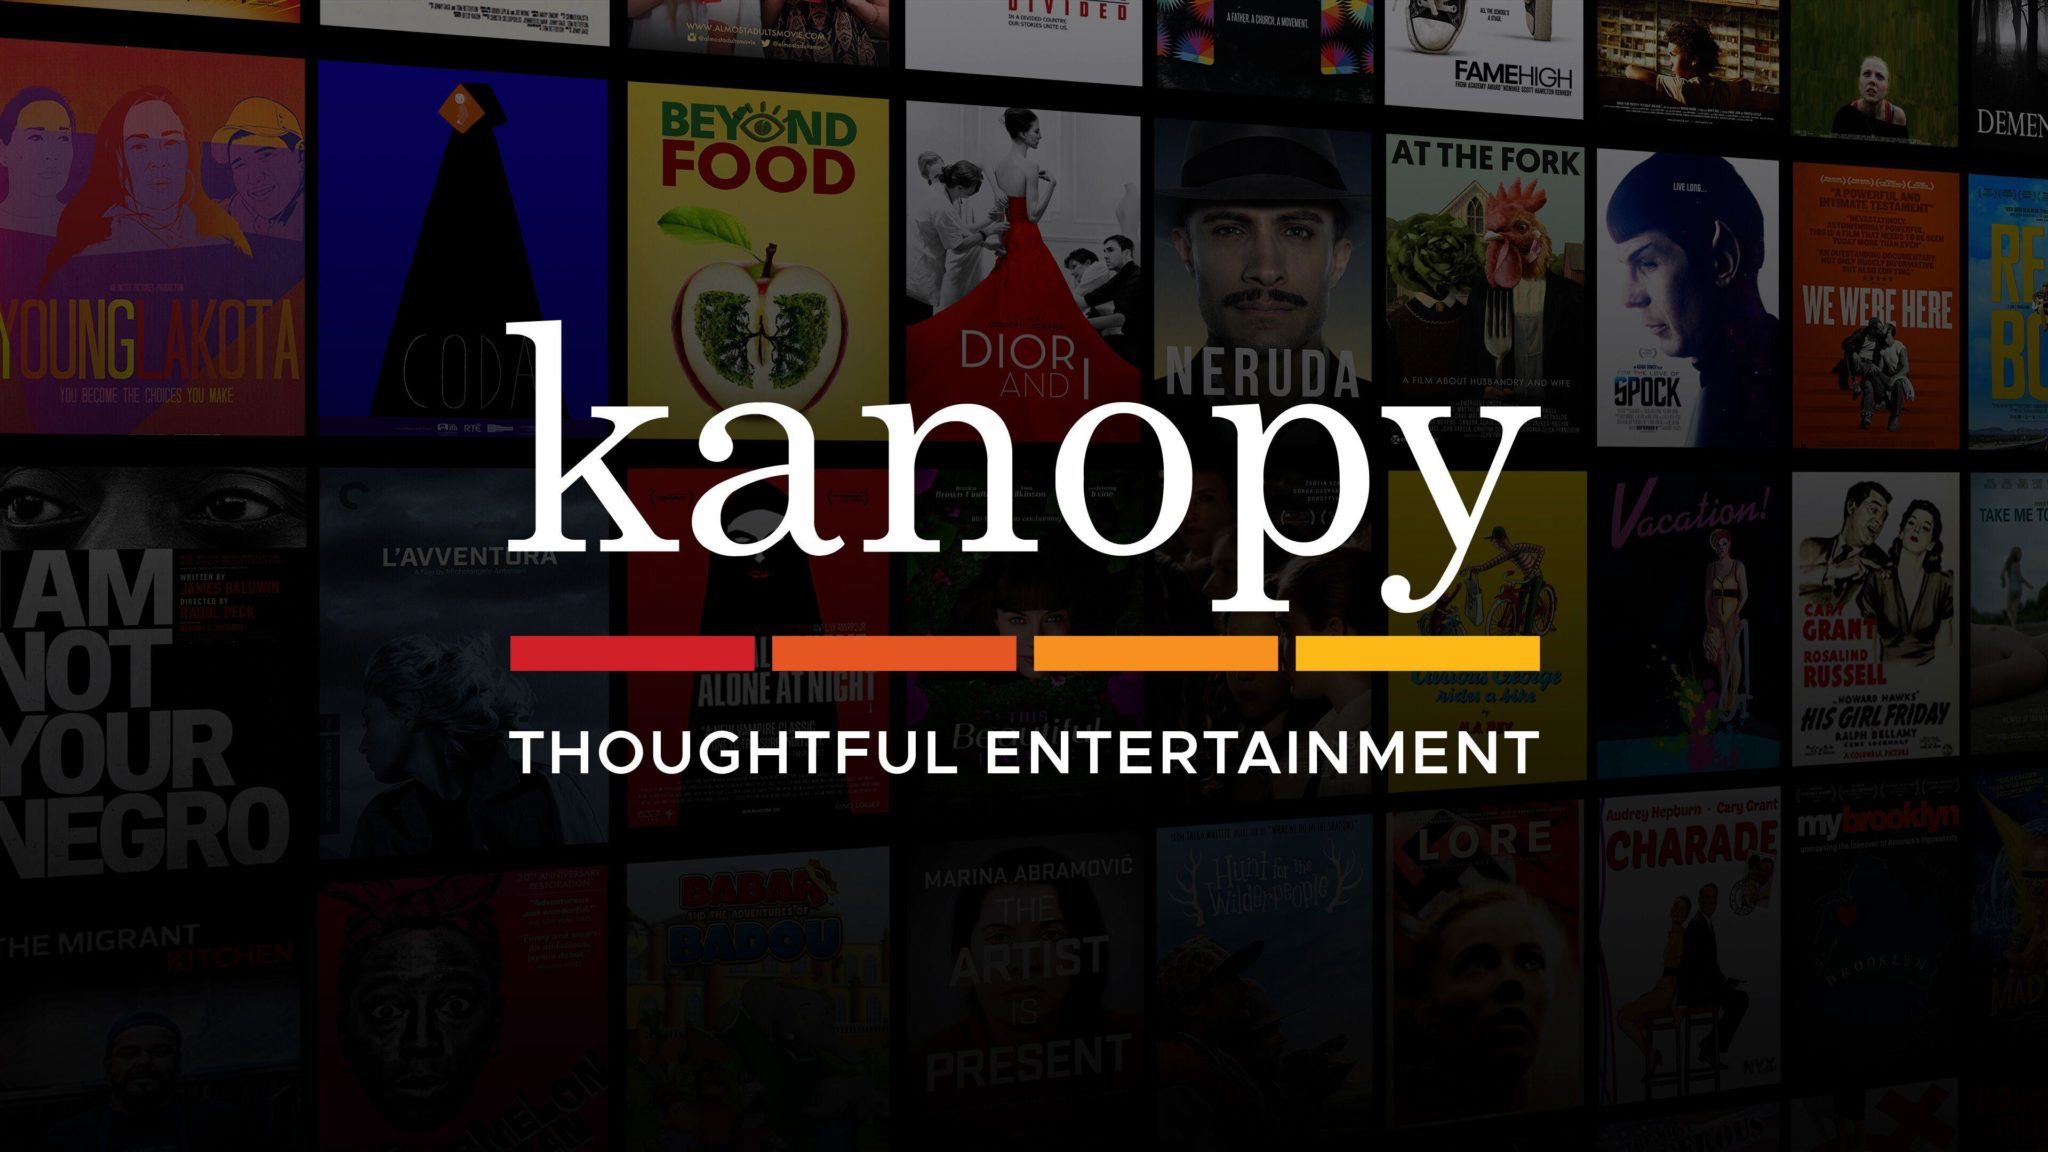 Many Public Libraries Are Now Streaming Free Movies & Kids Programming Thanks to Kanopy